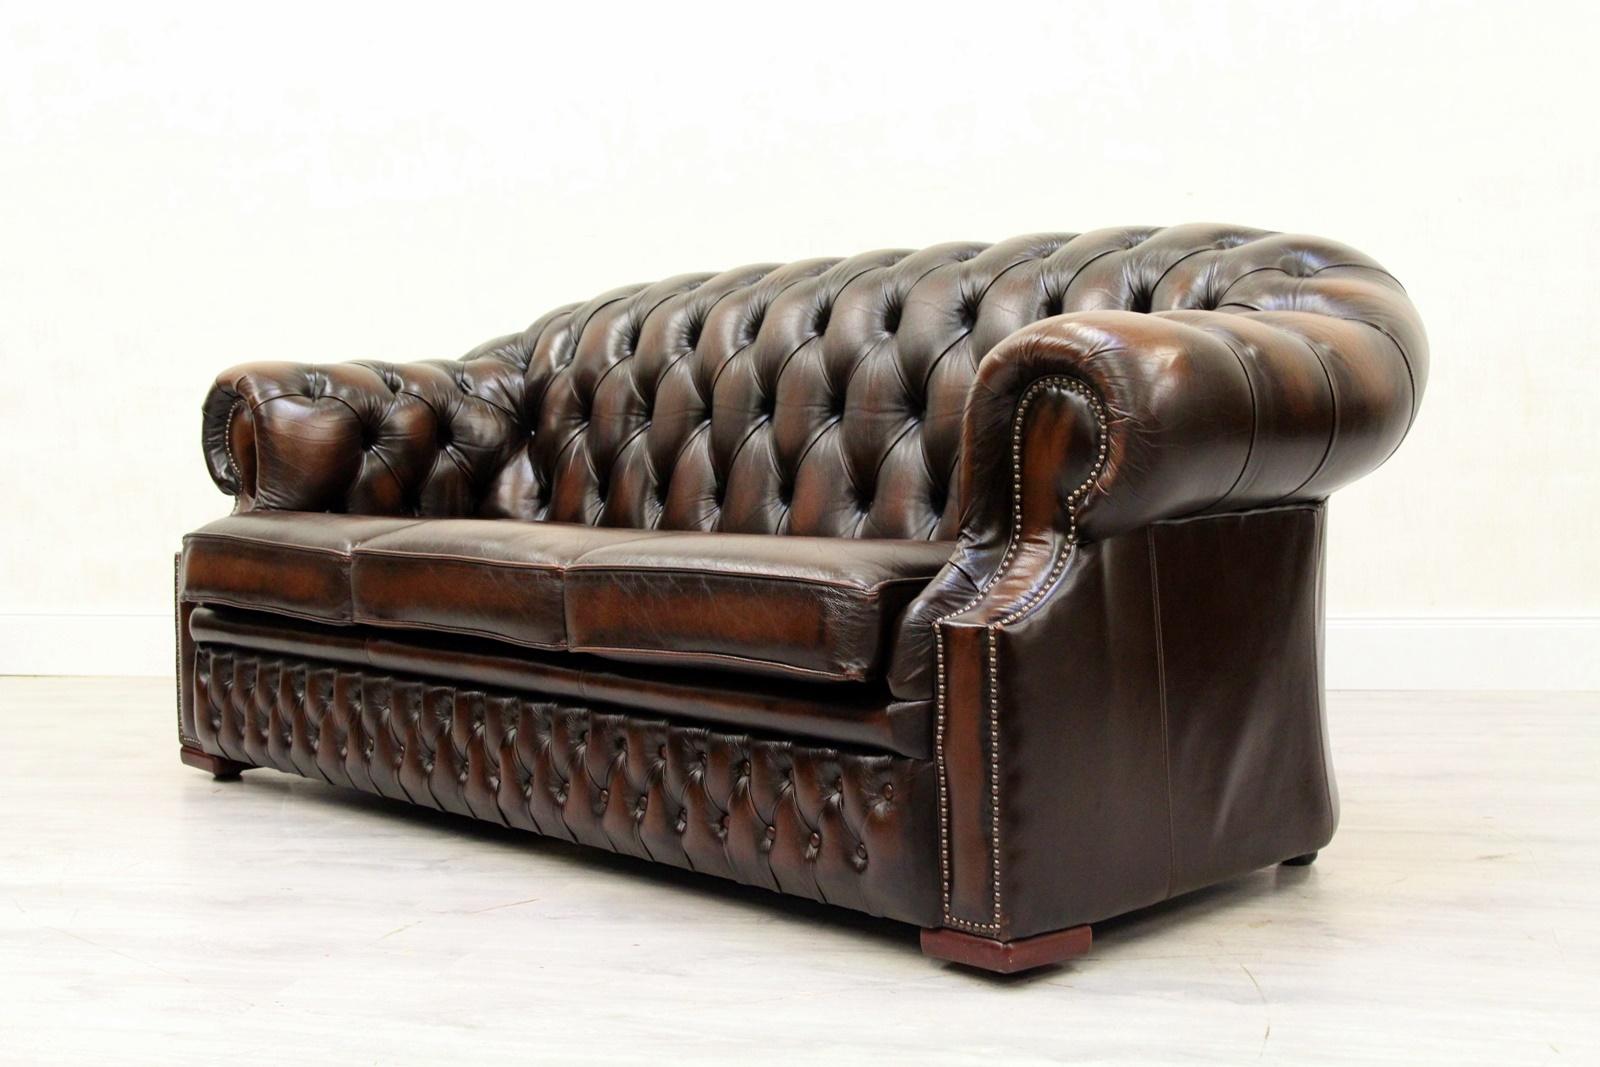 Chesterfield Centurion Sofa Leather Antique Vintage Couch, English For Sale 1